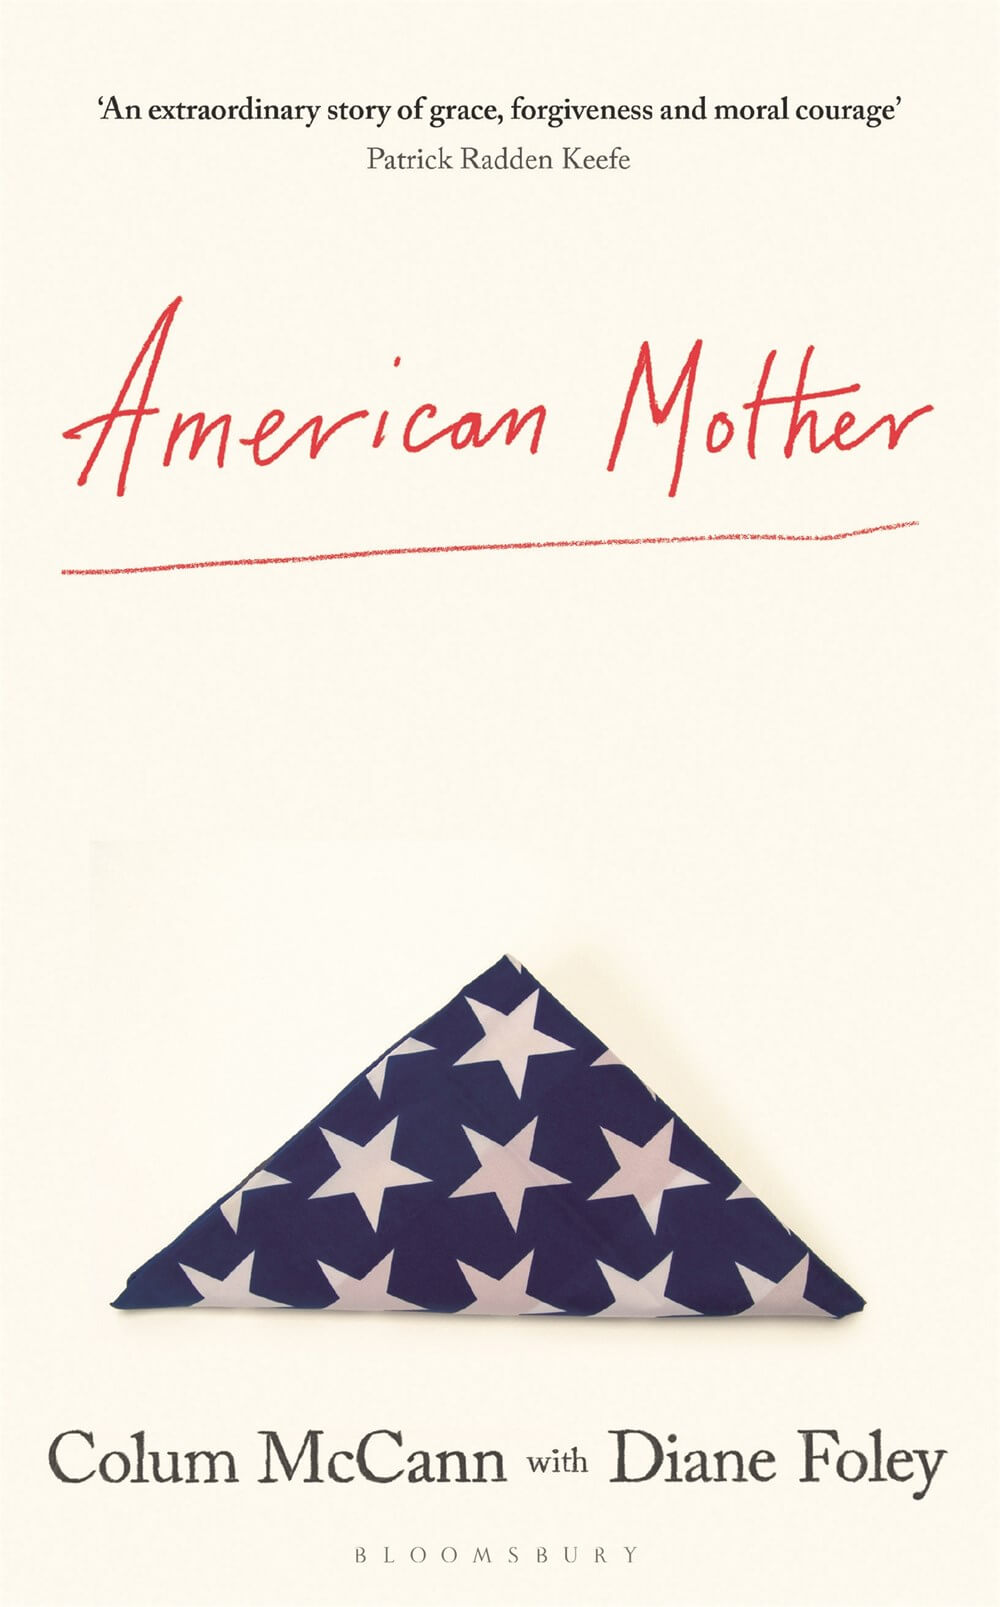 The cover for 'American Mother'.